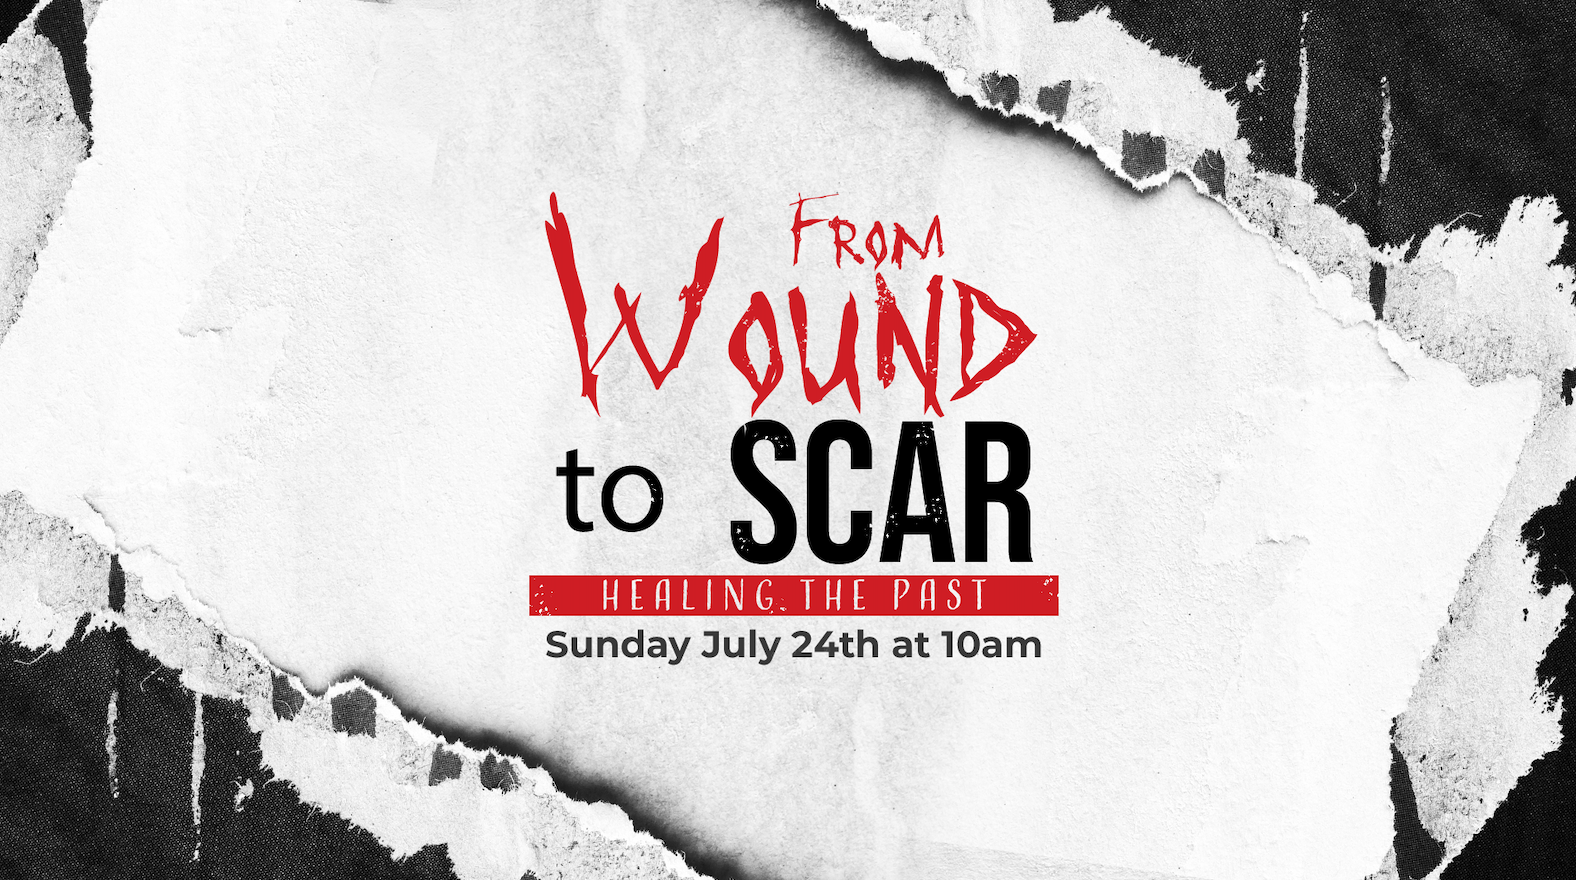 From Wound to Scar